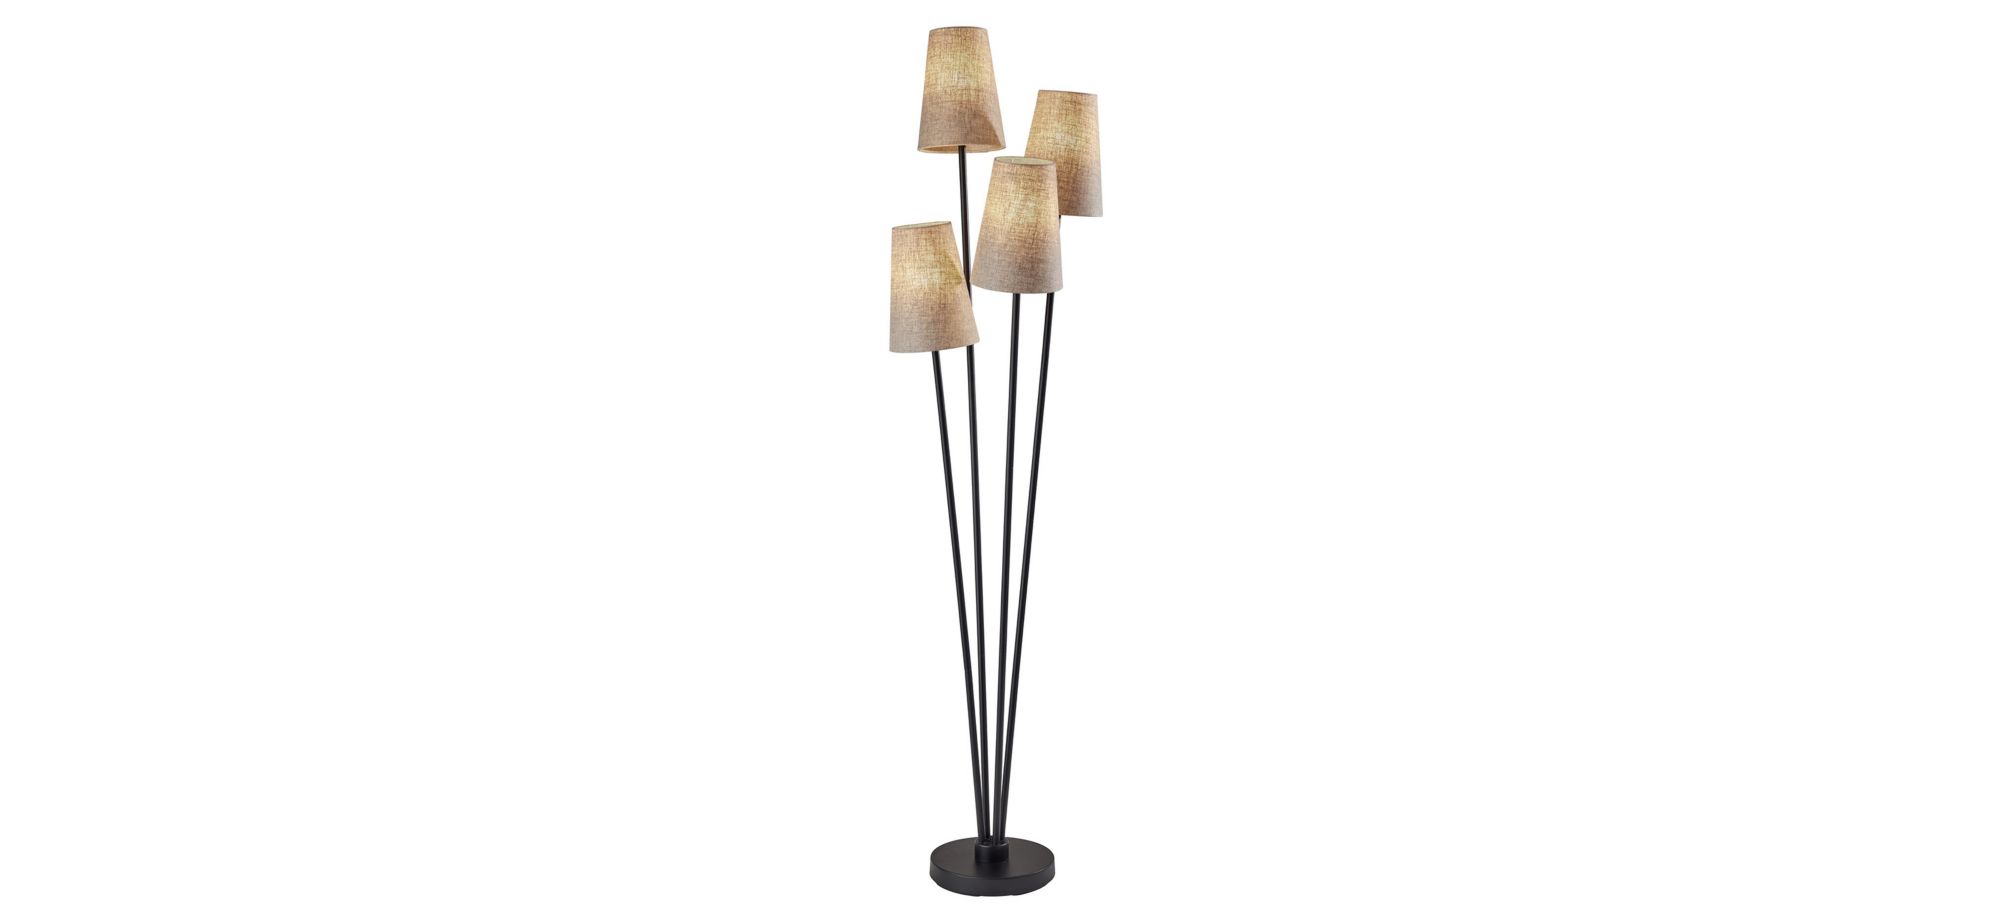 Wentworth Floor Lamp in Natural by Adesso Inc